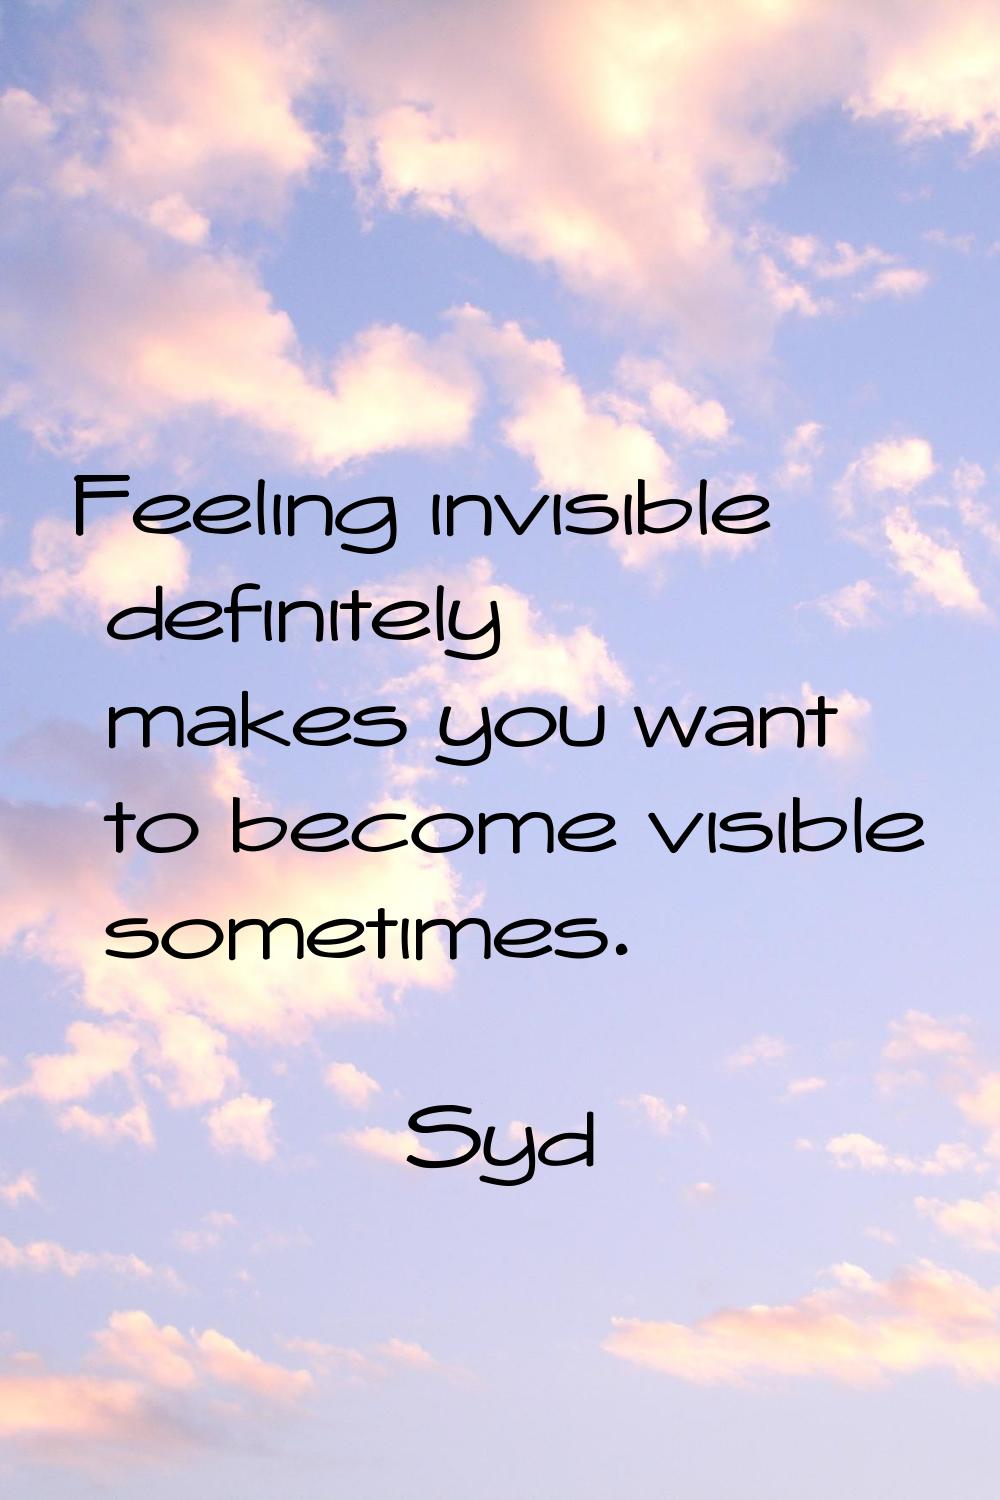 Feeling invisible definitely makes you want to become visible sometimes.